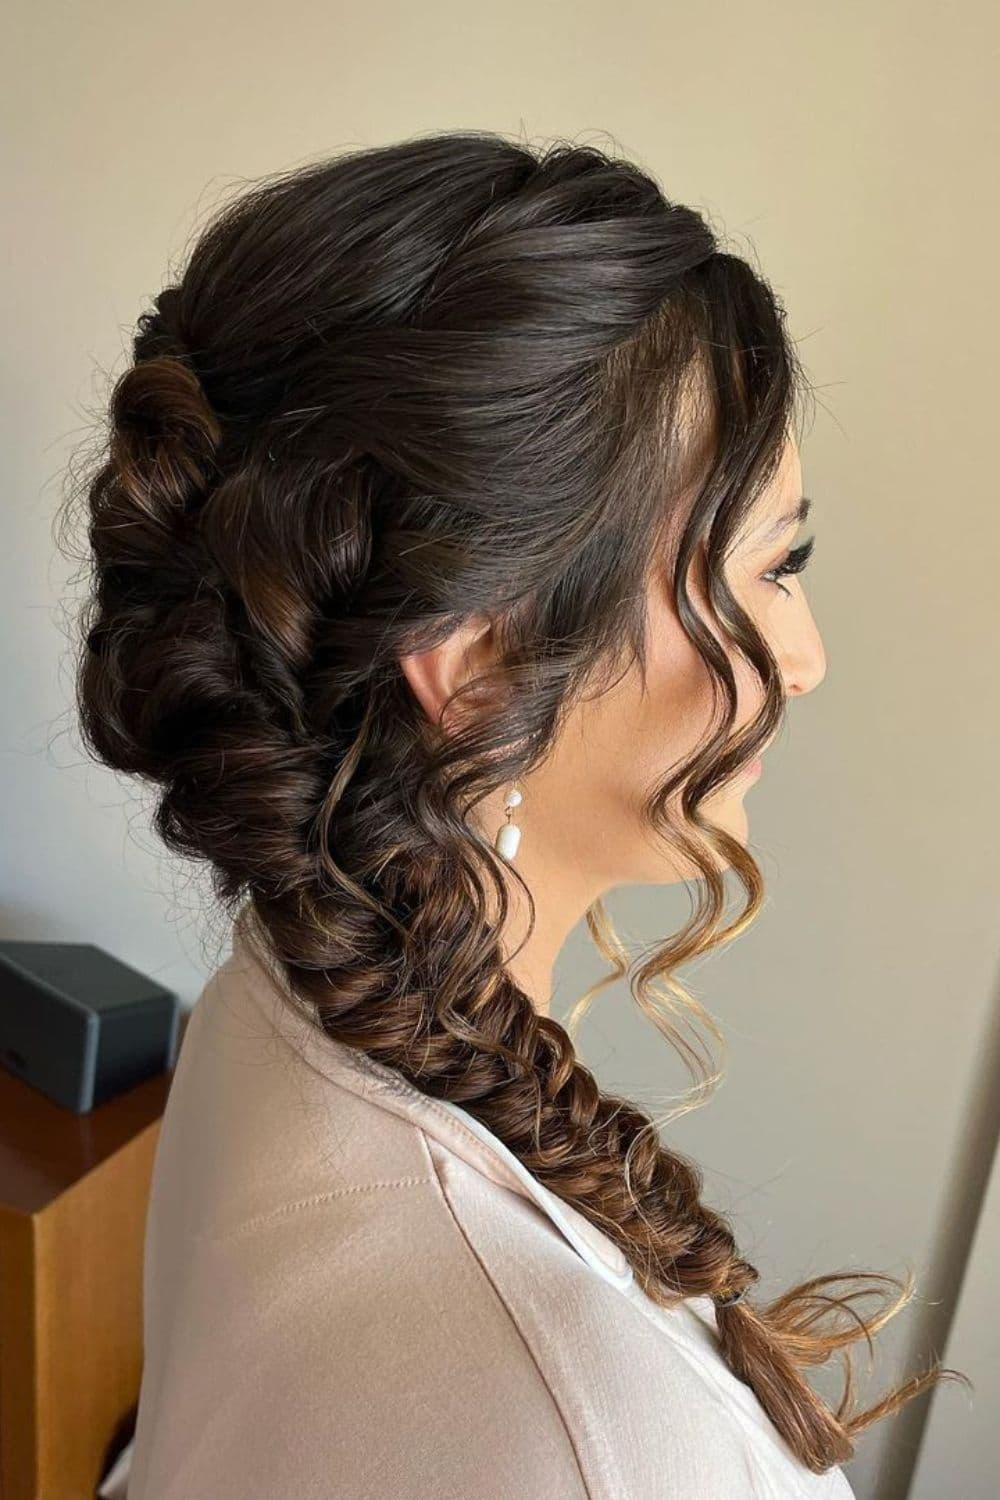 A woman with a brown side braid.